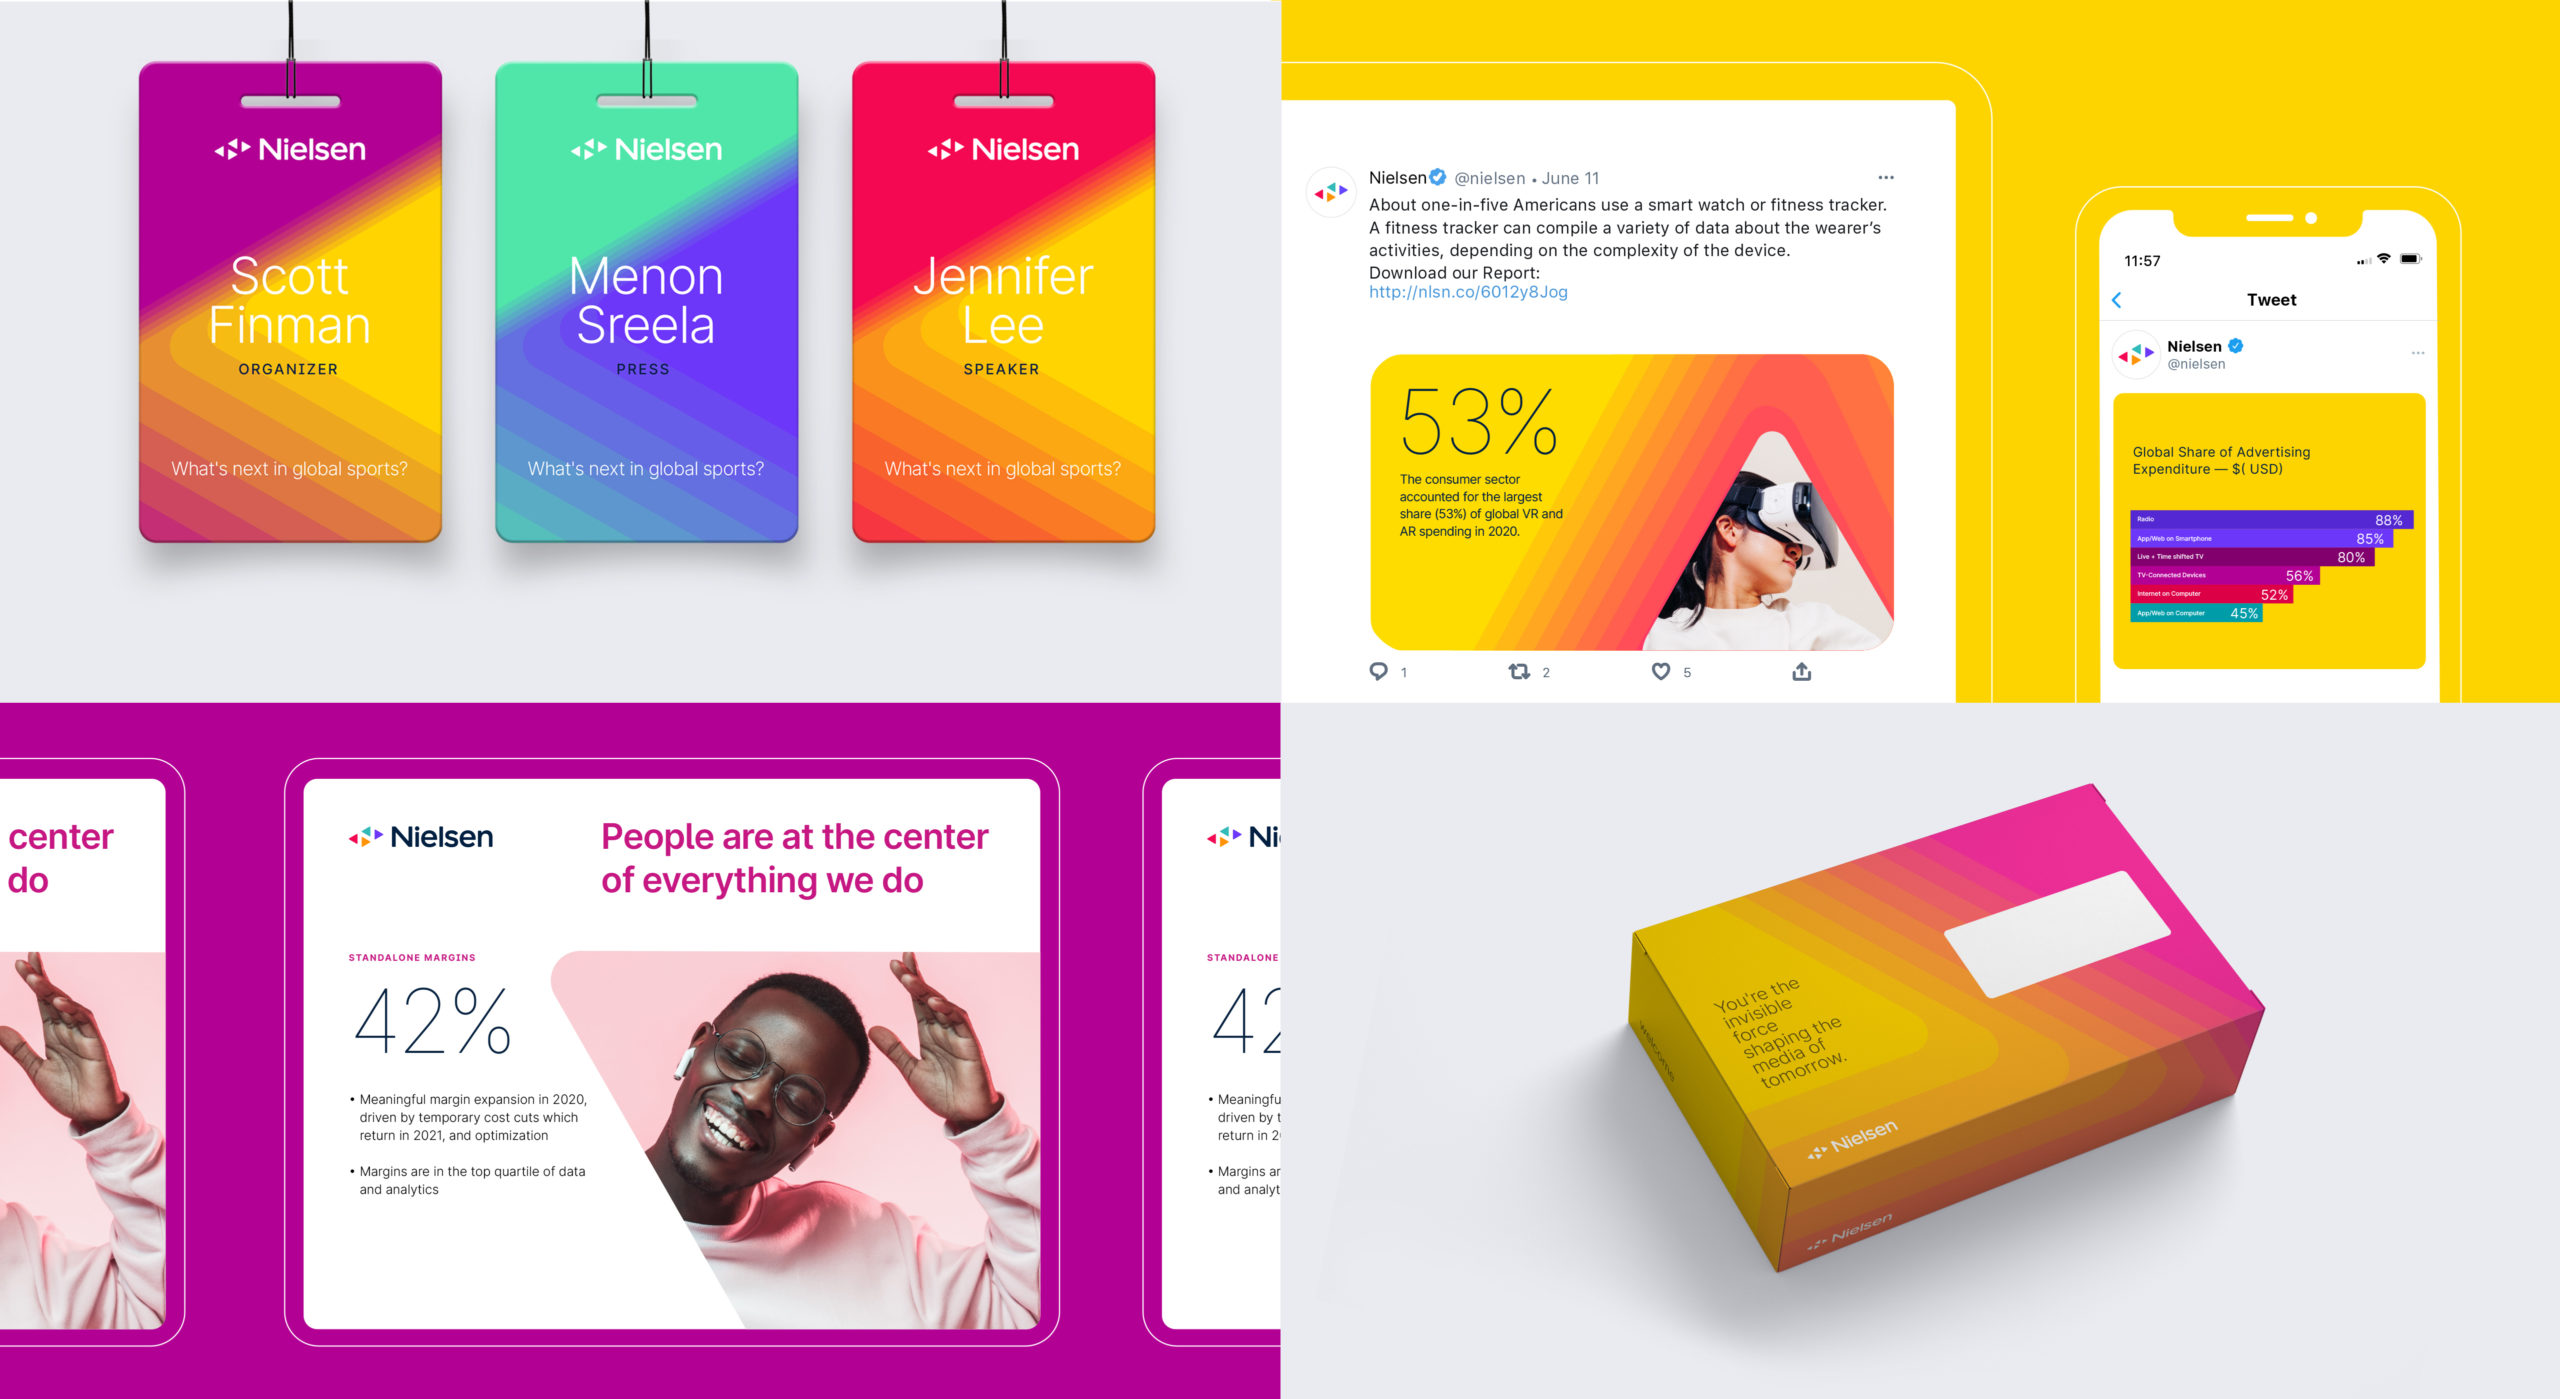 Nielsen’s new graphic style and visual identity on their website, name tags, tweets, and packaging